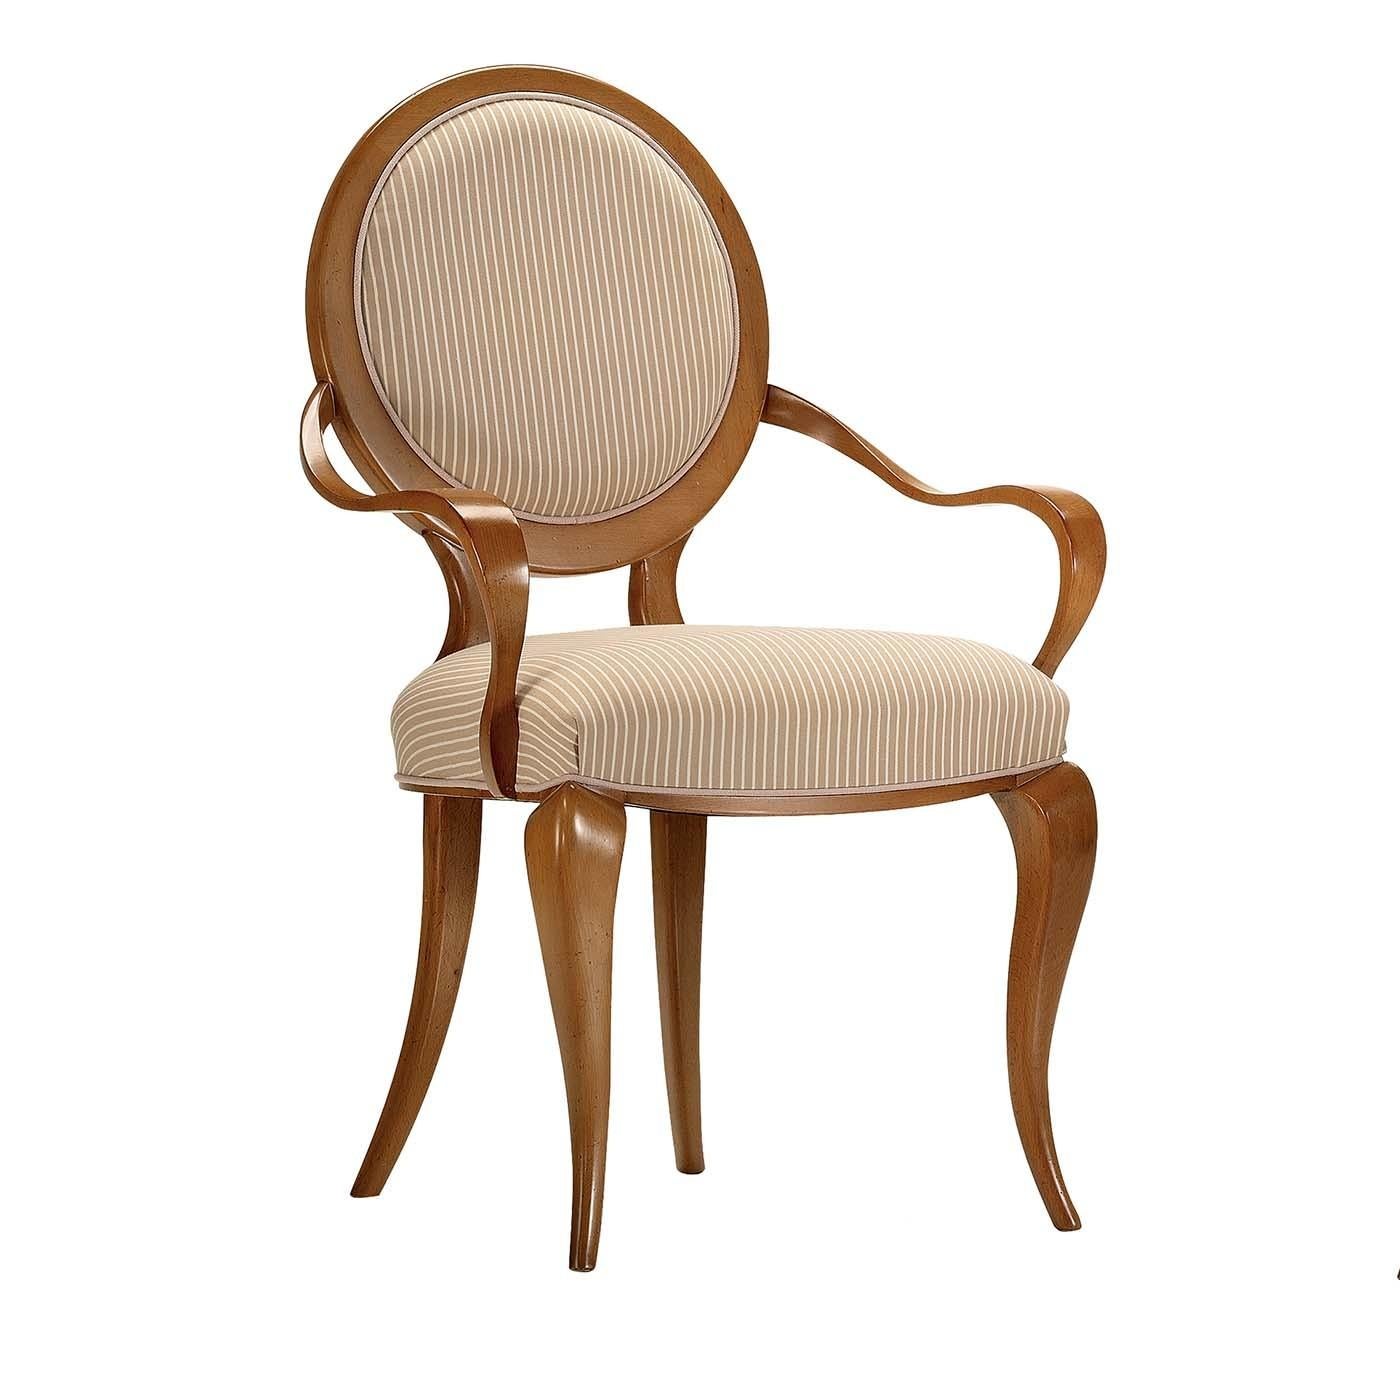 Comfortable and welcoming, the contemporary line chair with armrests is the ideal chair for the living or dining room table. The wooden structure blends perfectly with the padded seat and backrest upholstered with striped fabric in delicate beige